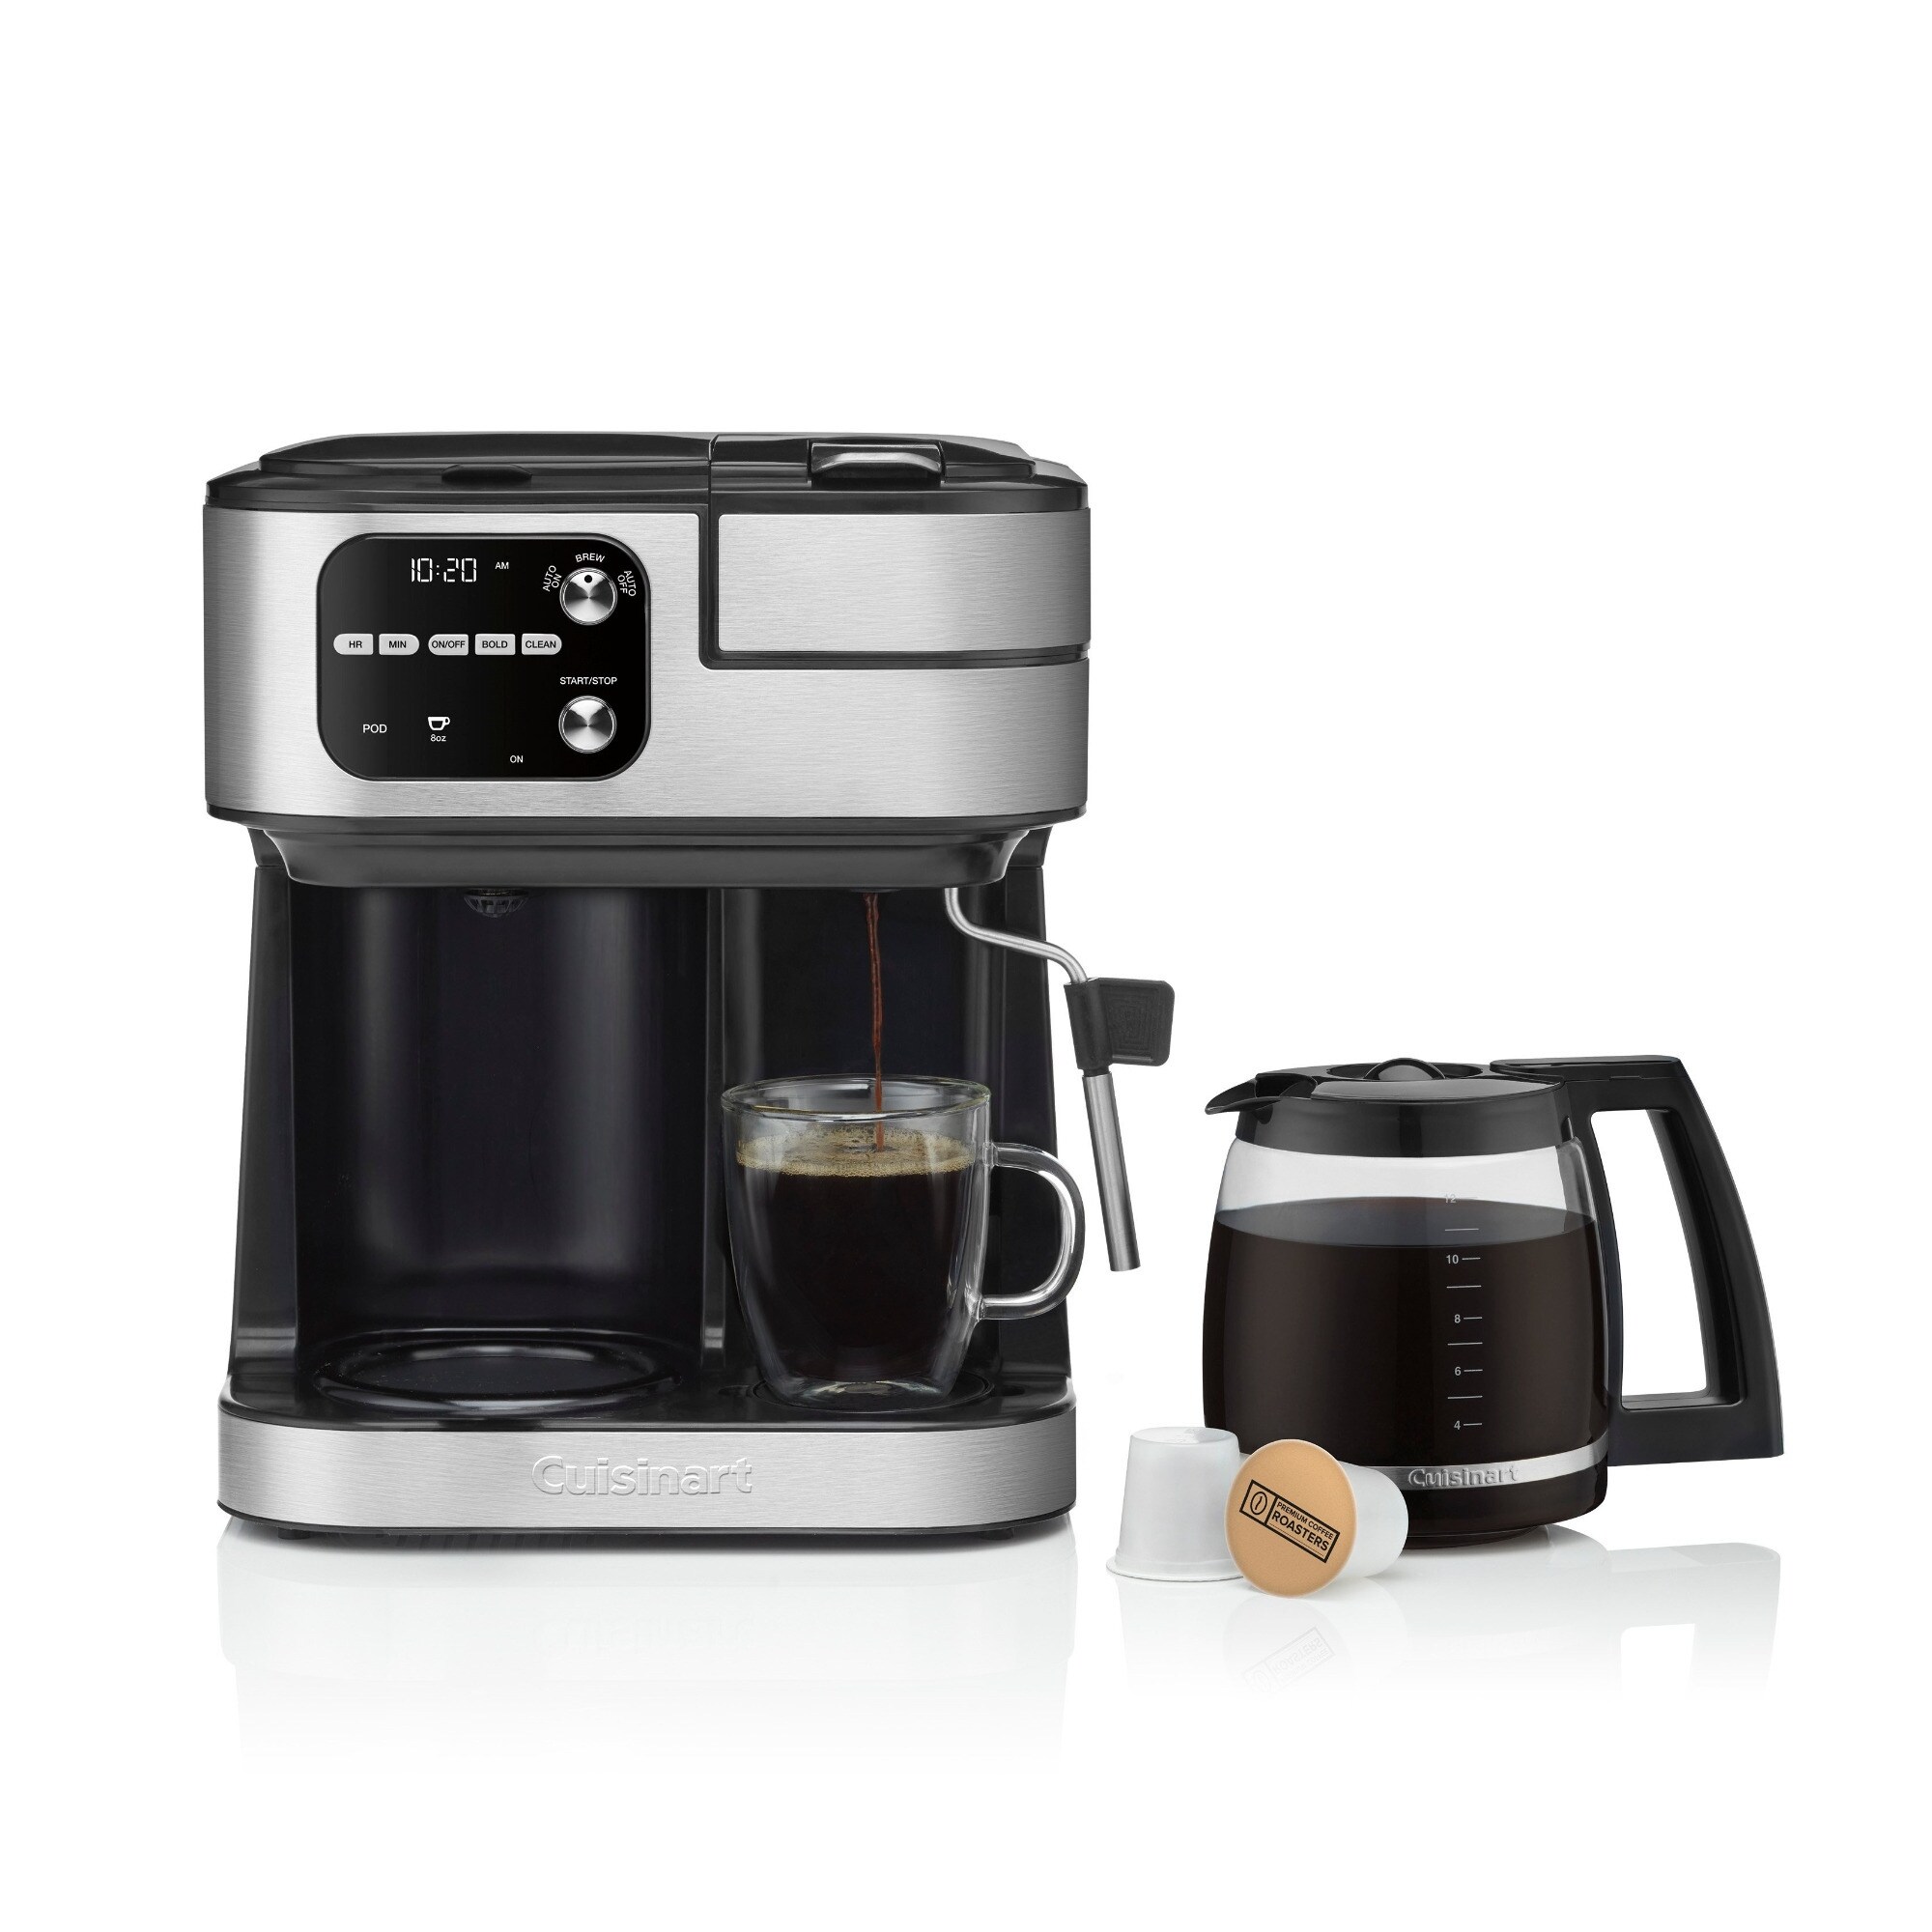 Cuisinart DGB-400 Blade Grind and Brew - 12 Cup - Bed Bath